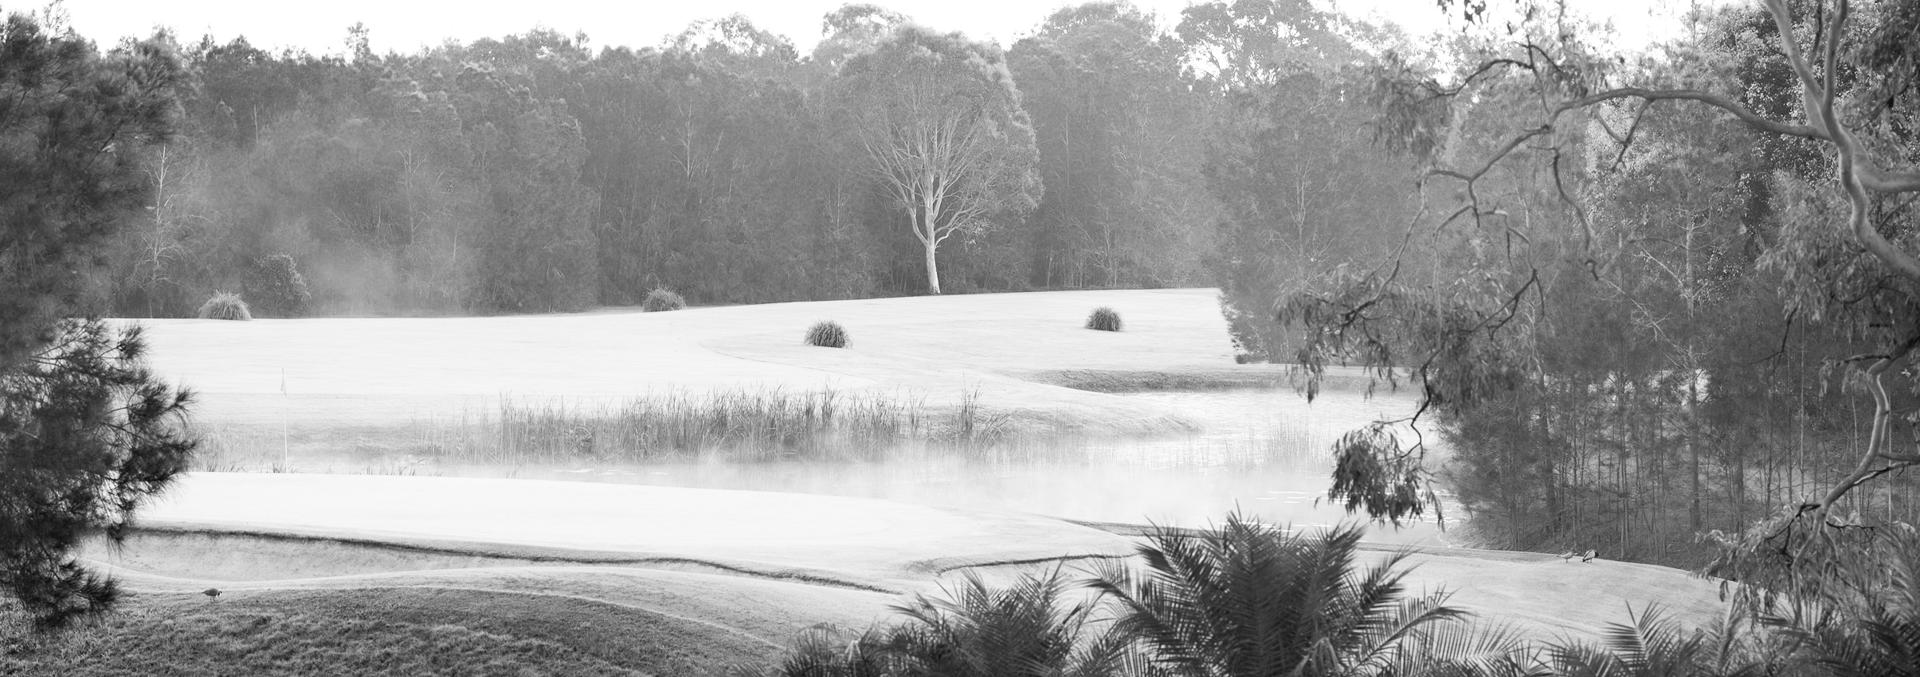 Landscape shot of the golf course and steamy lake